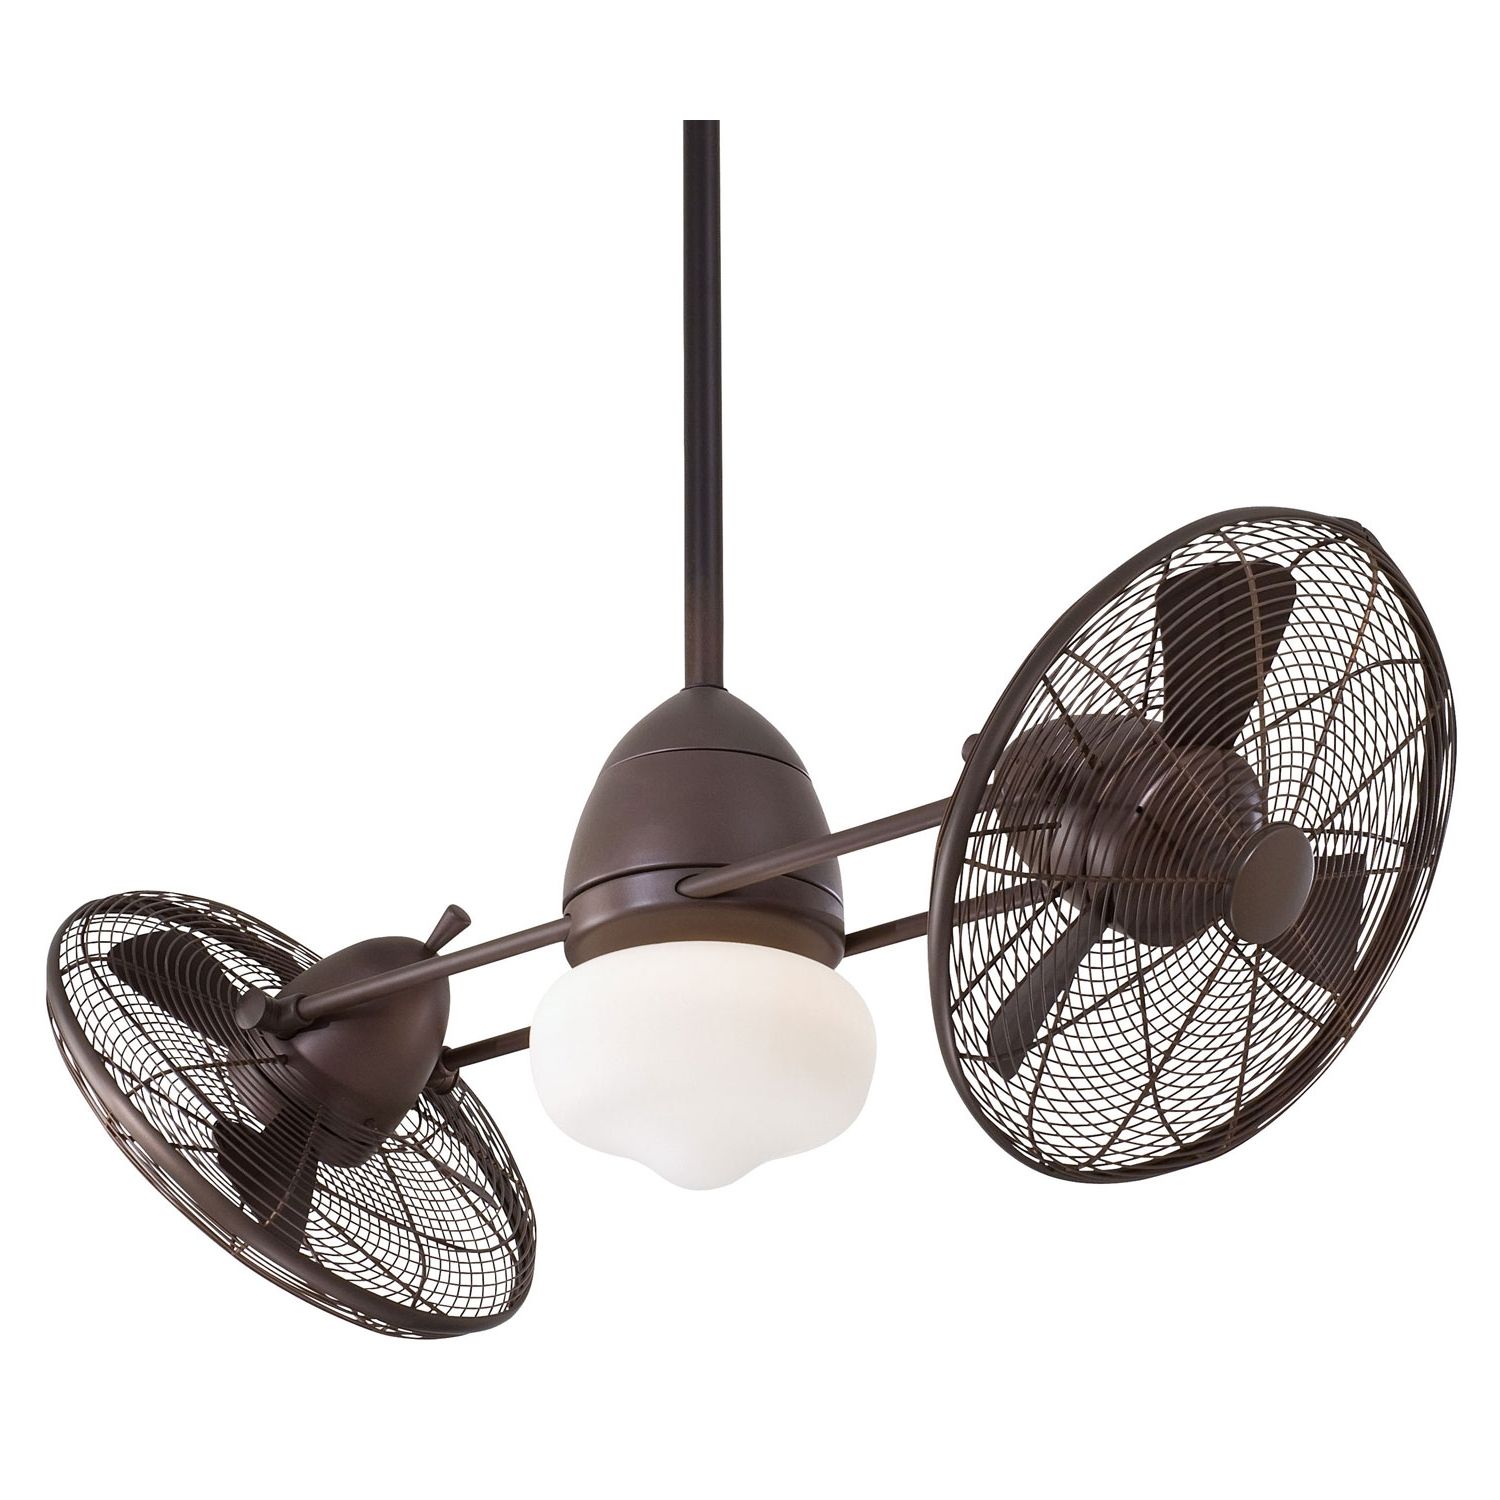 Best And Newest Minka Aire Outdoor Ceiling Fans With Lights Throughout Minka Aire 42 Inch Gyro Wet Indoor/outdoor Oil Rubbed Bronze Ceiling (View 11 of 20)